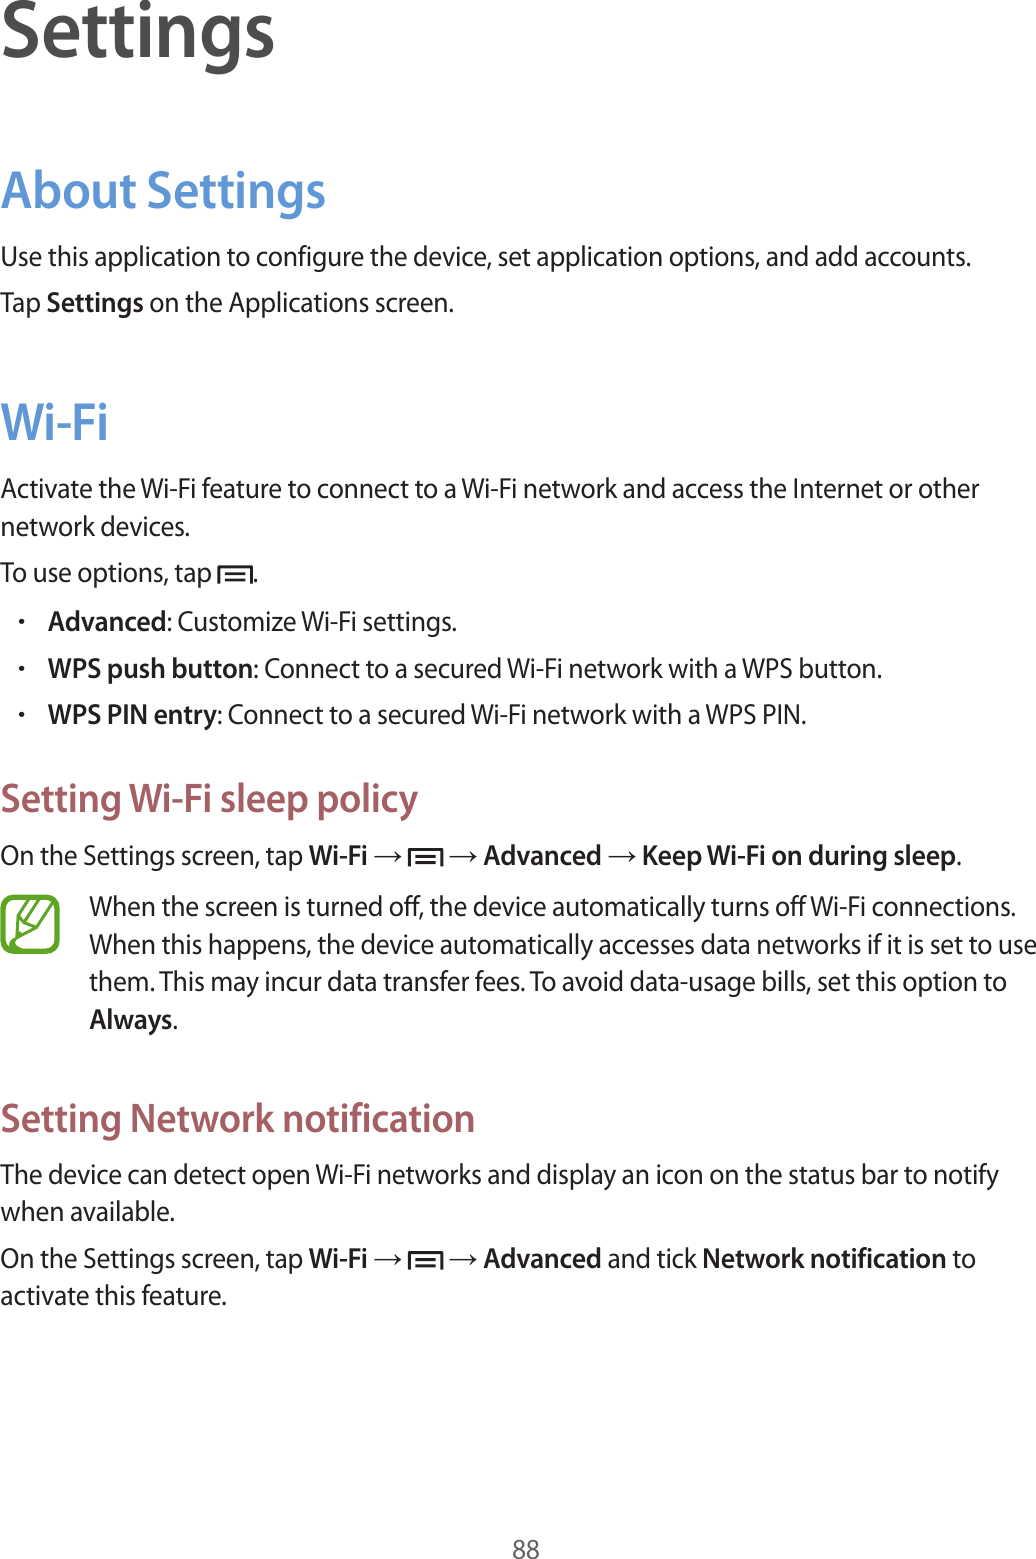 88SettingsAbout SettingsUse this application to configure the device, set application options, and add accounts.Tap Settings on the Applications screen.Wi-FiActivate the Wi-Fi feature to connect to a Wi-Fi network and access the Internet or other network devices.To use options, tap  .• Advanced: Customize Wi-Fi settings.• WPS push button: Connect to a secured Wi-Fi network with a WPS button.• WPS PIN entry: Connect to a secured Wi-Fi network with a WPS PIN.Setting Wi-Fi sleep policyOn the Settings screen, tap Wi-Fi →   → Advanced → Keep Wi-Fi on during sleep.When the screen is turned off, the device automatically turns off Wi-Fi connections. When this happens, the device automatically accesses data networks if it is set to use them. This may incur data transfer fees. To avoid data-usage bills, set this option to Always.Setting Network notificationThe device can detect open Wi-Fi networks and display an icon on the status bar to notify when available.On the Settings screen, tap Wi-Fi →   → Advanced and tick Network notification to activate this feature.